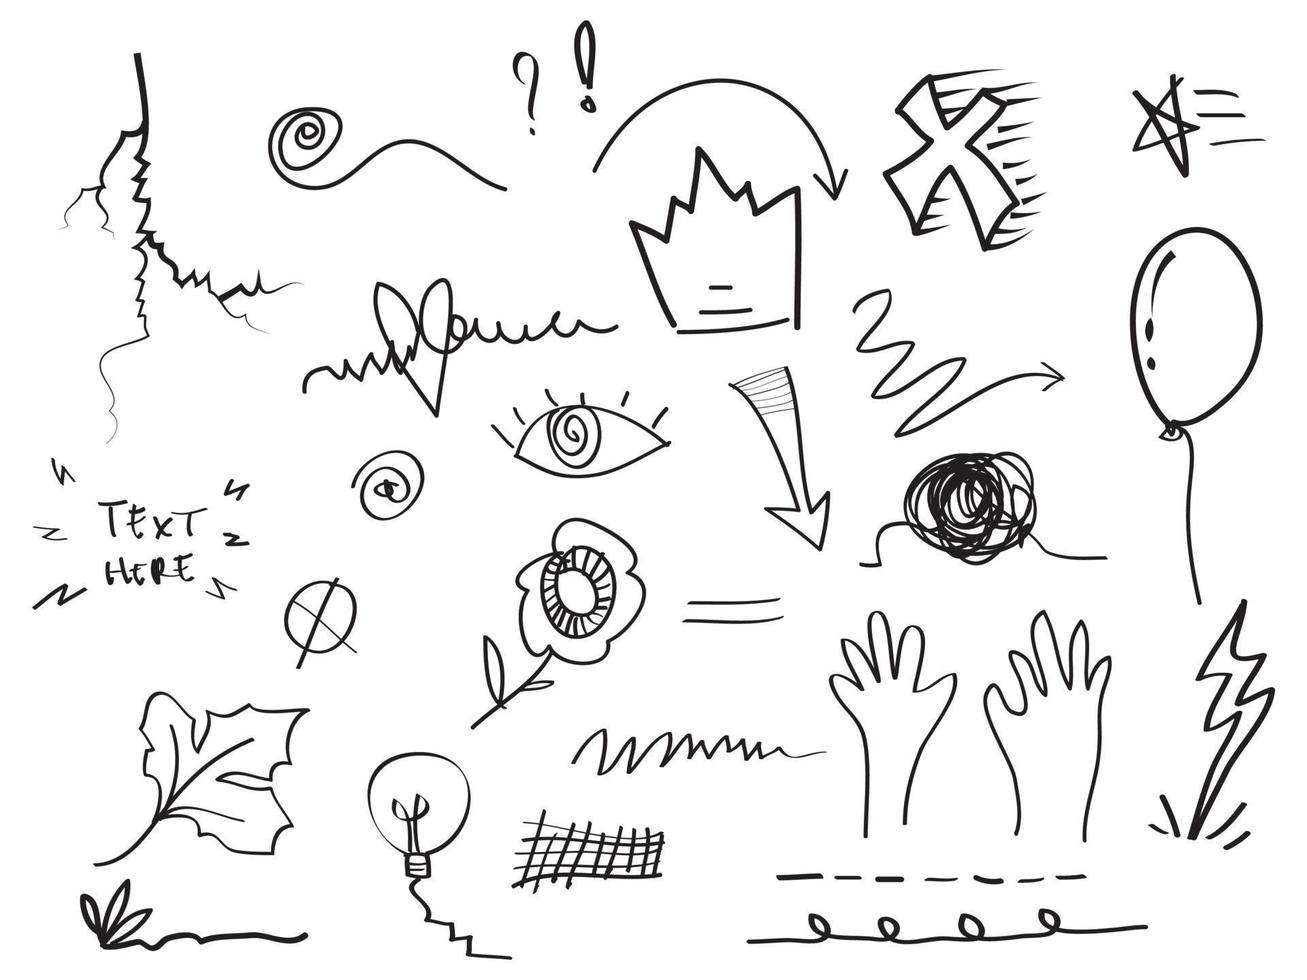 hand drawn set of abstract comic doodle elements. use for concept design. isolated on white background. vector illustration